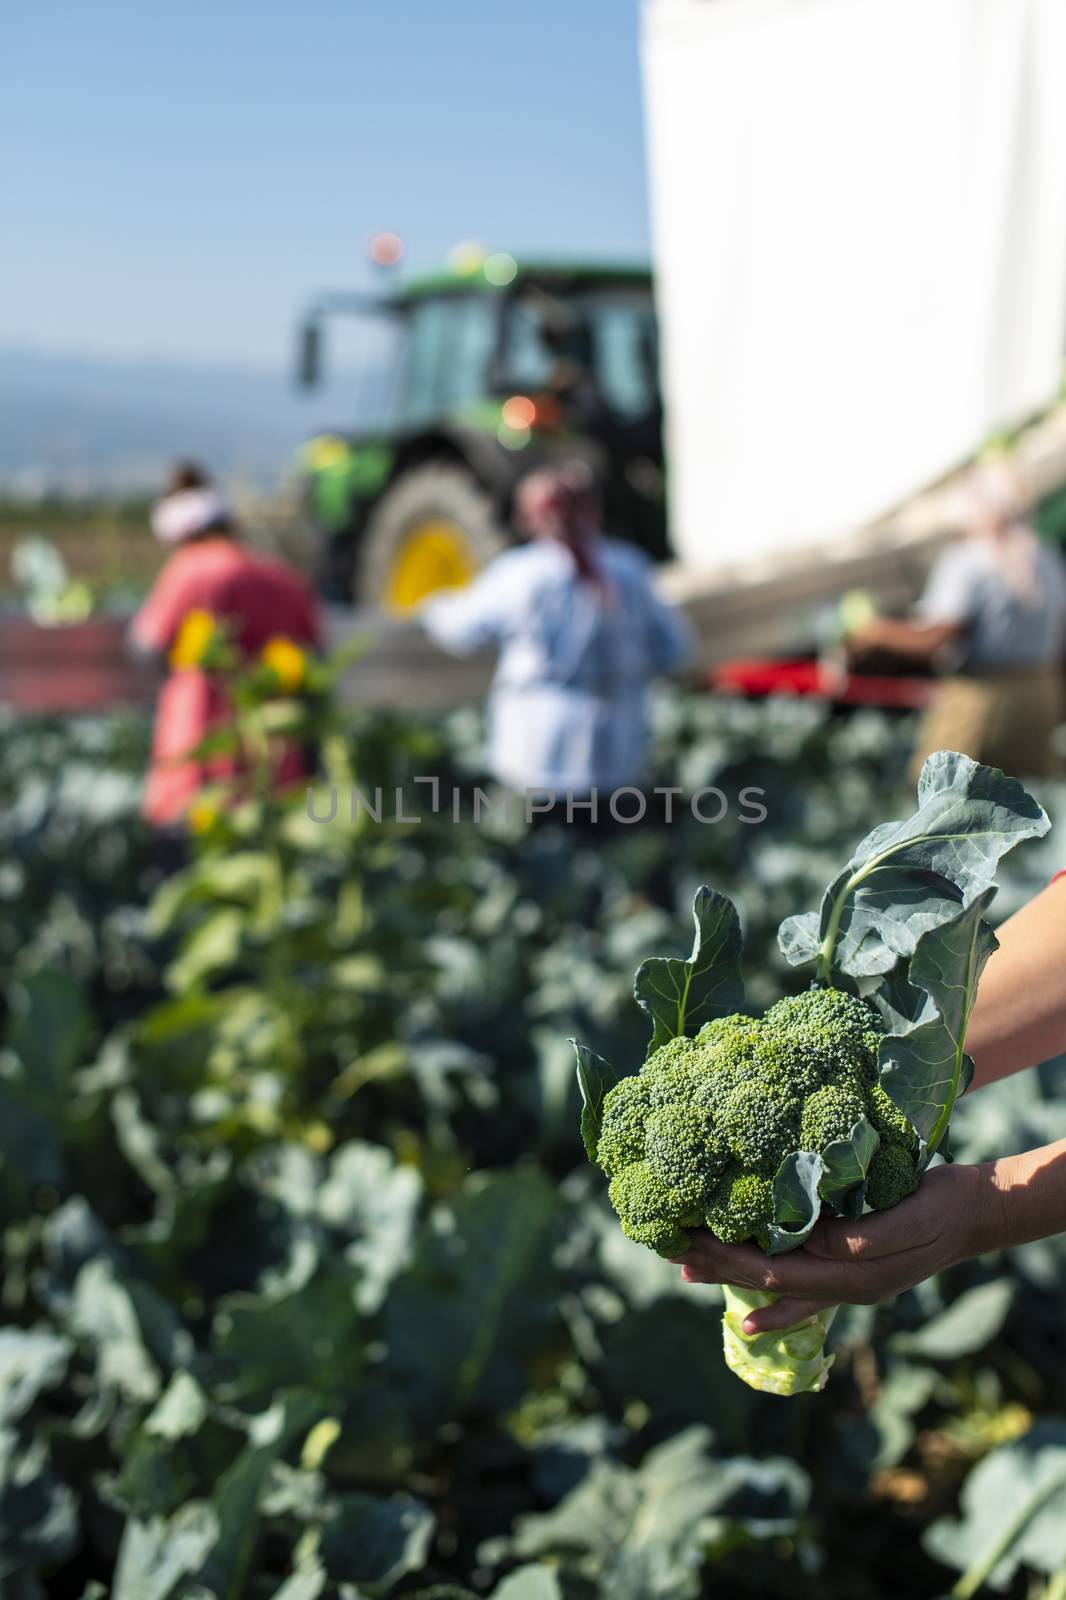 Worker shows broccoli on plantation. Picking broccoli. Tractor and automated platform in broccoli big garden. Sunny day. Woman hold broccoli head.